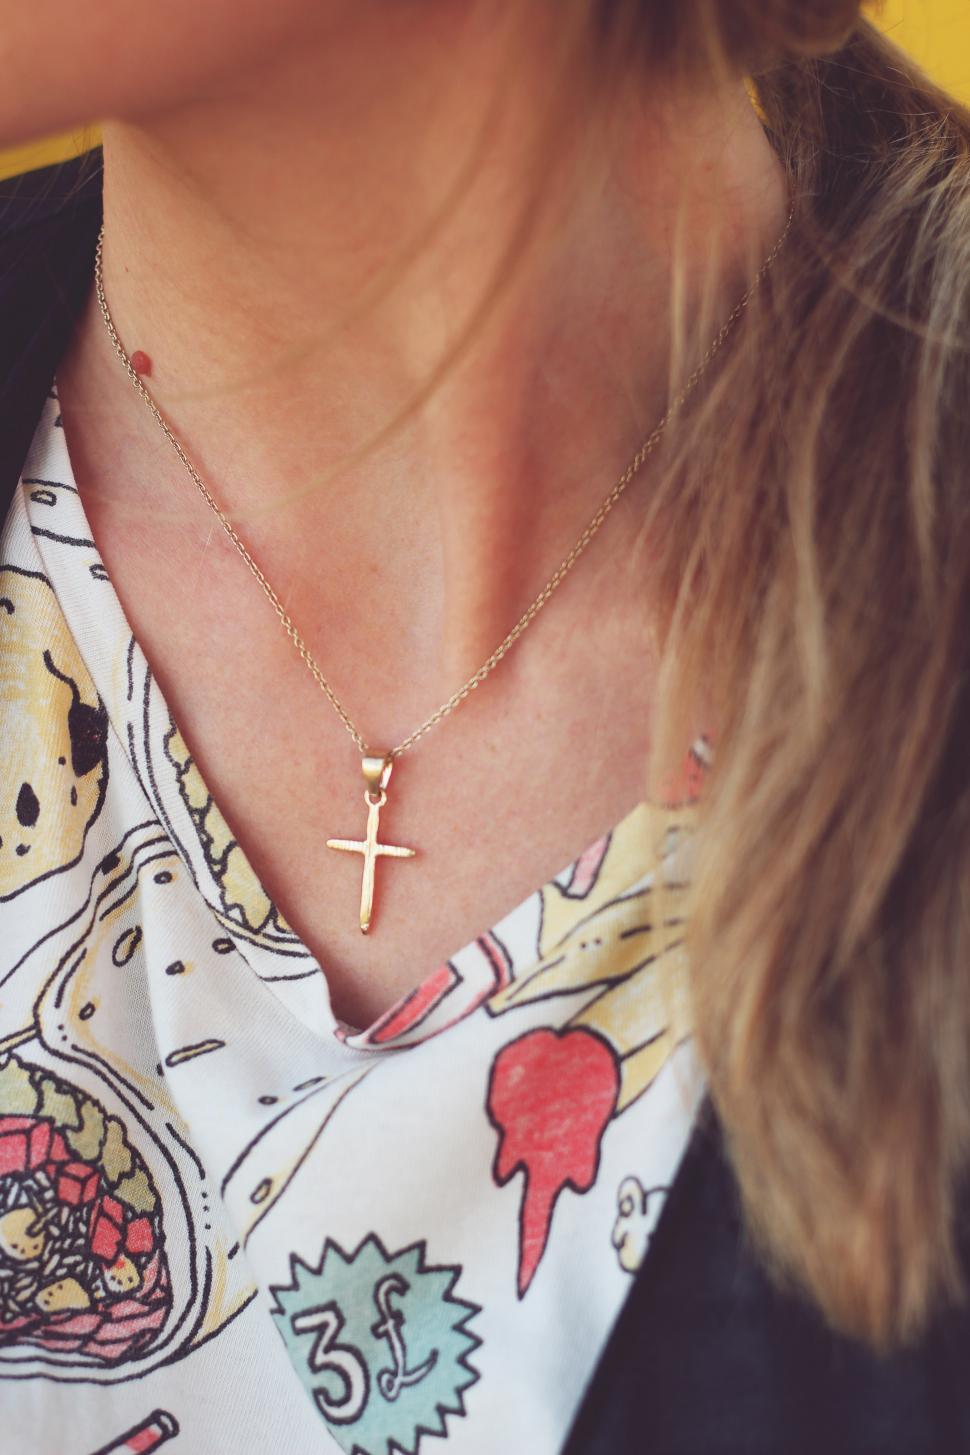 Free Image of Woman Wearing a Cross Necklace 